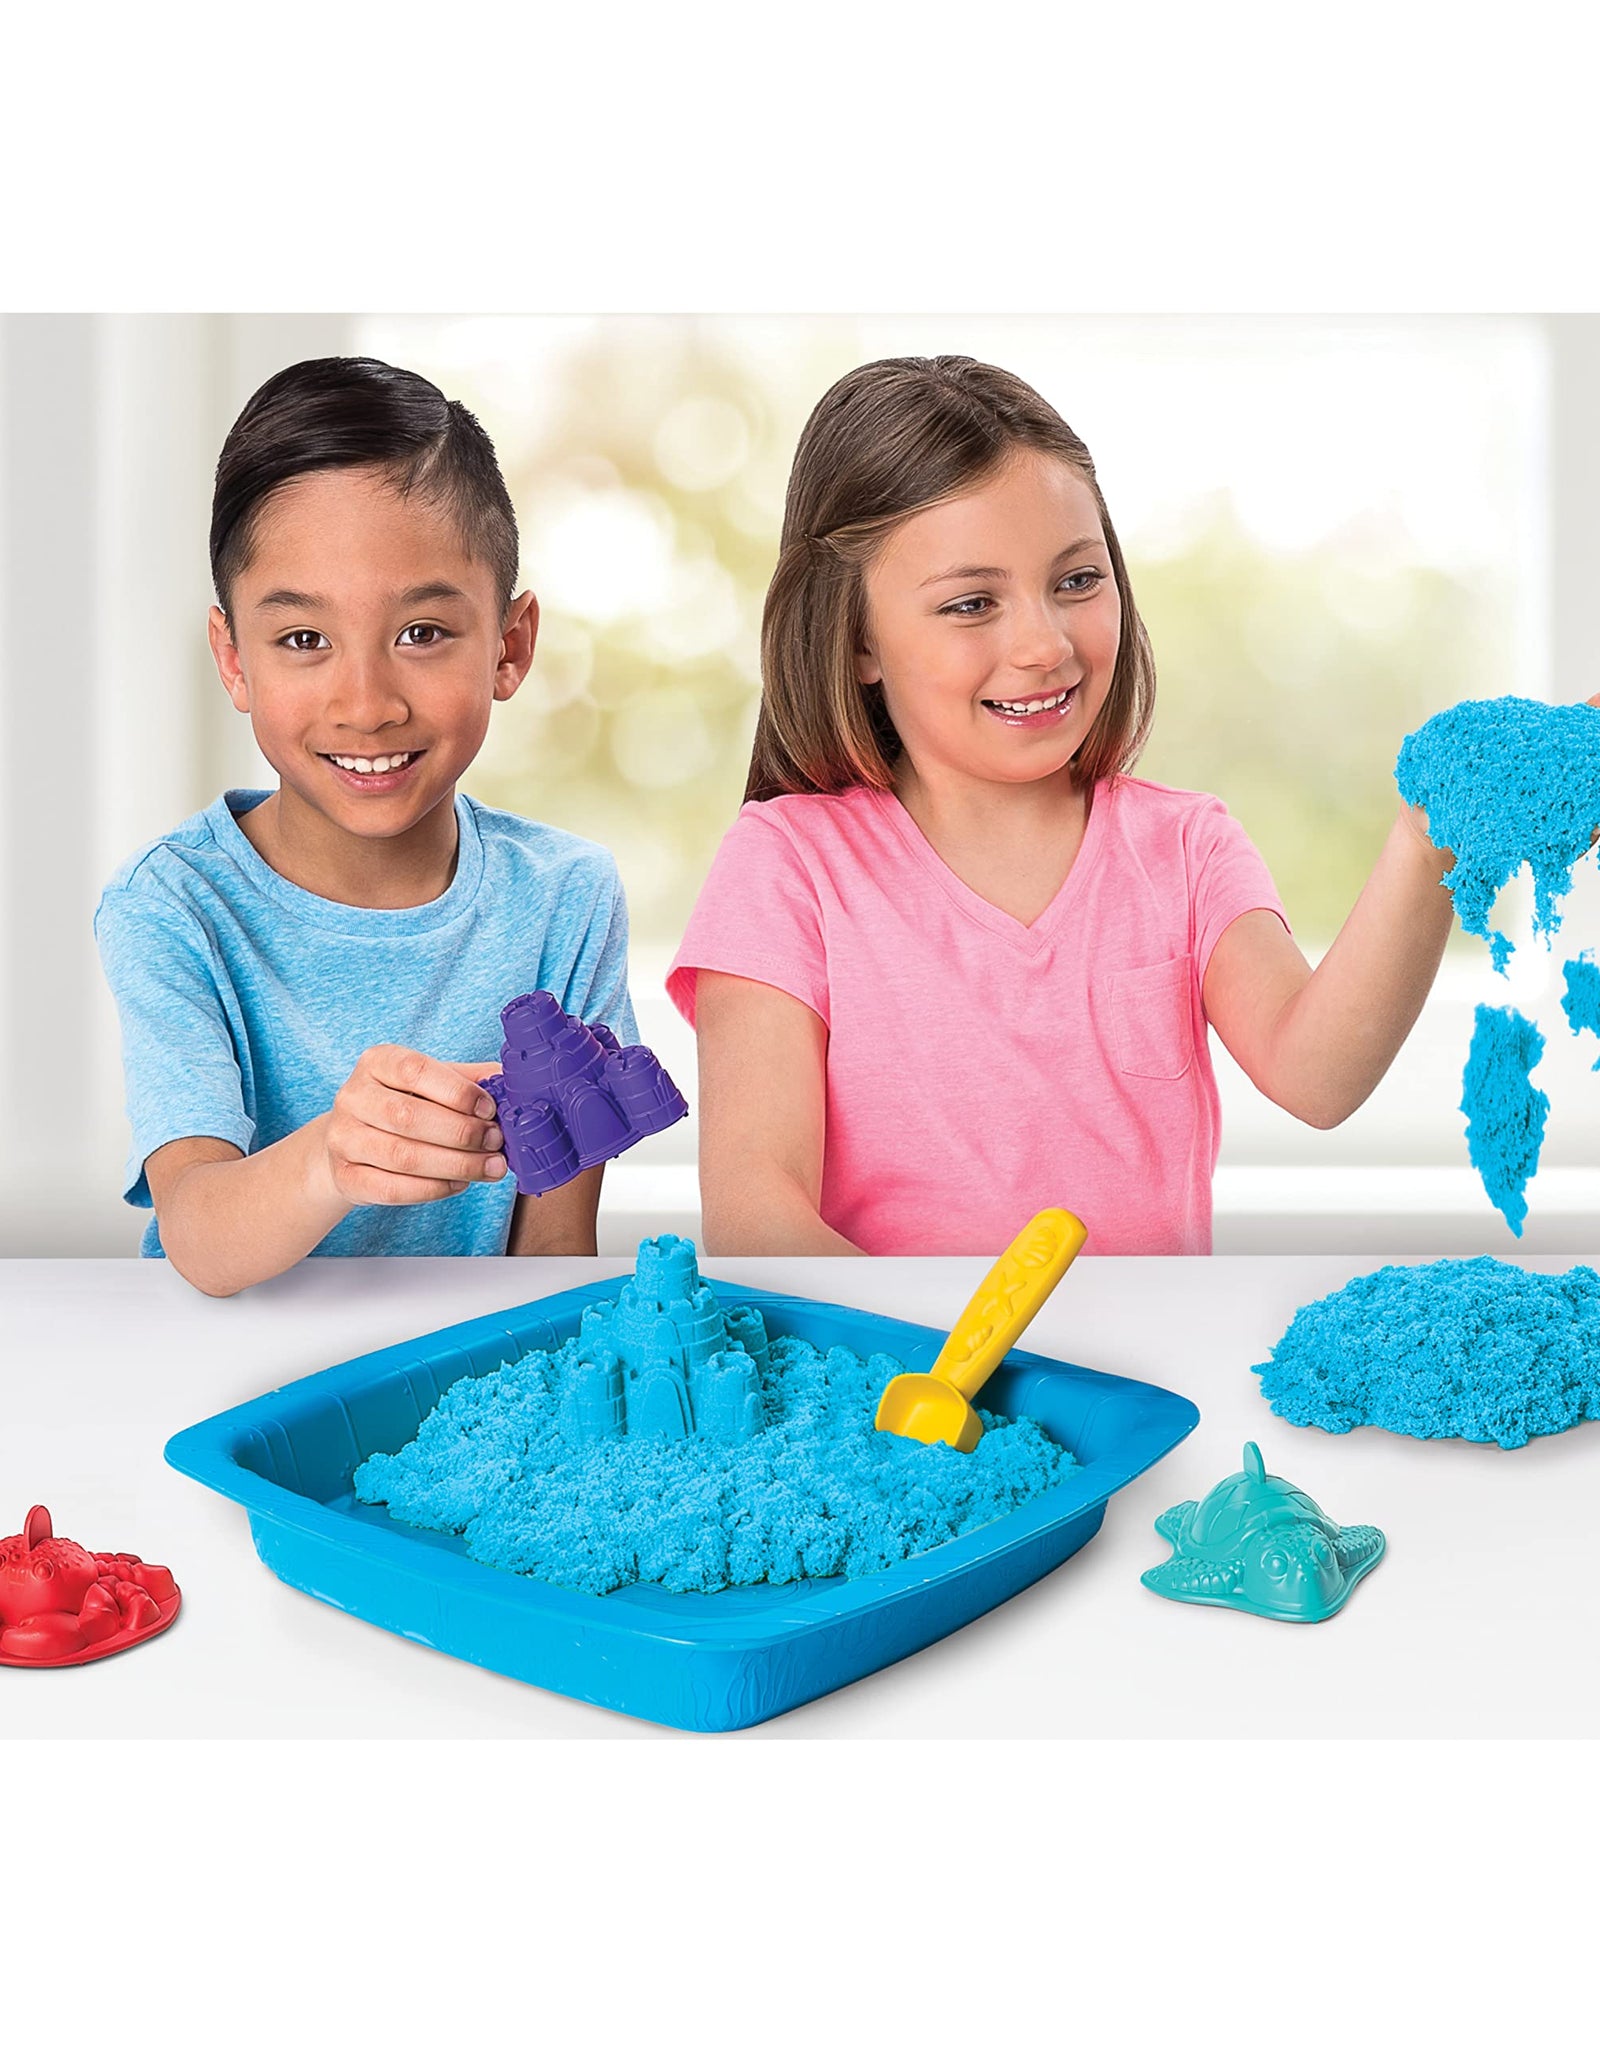 Kinetic Sand, Sandbox Playset with 1lb of Purple and 3 Molds, for Ages 3 and up